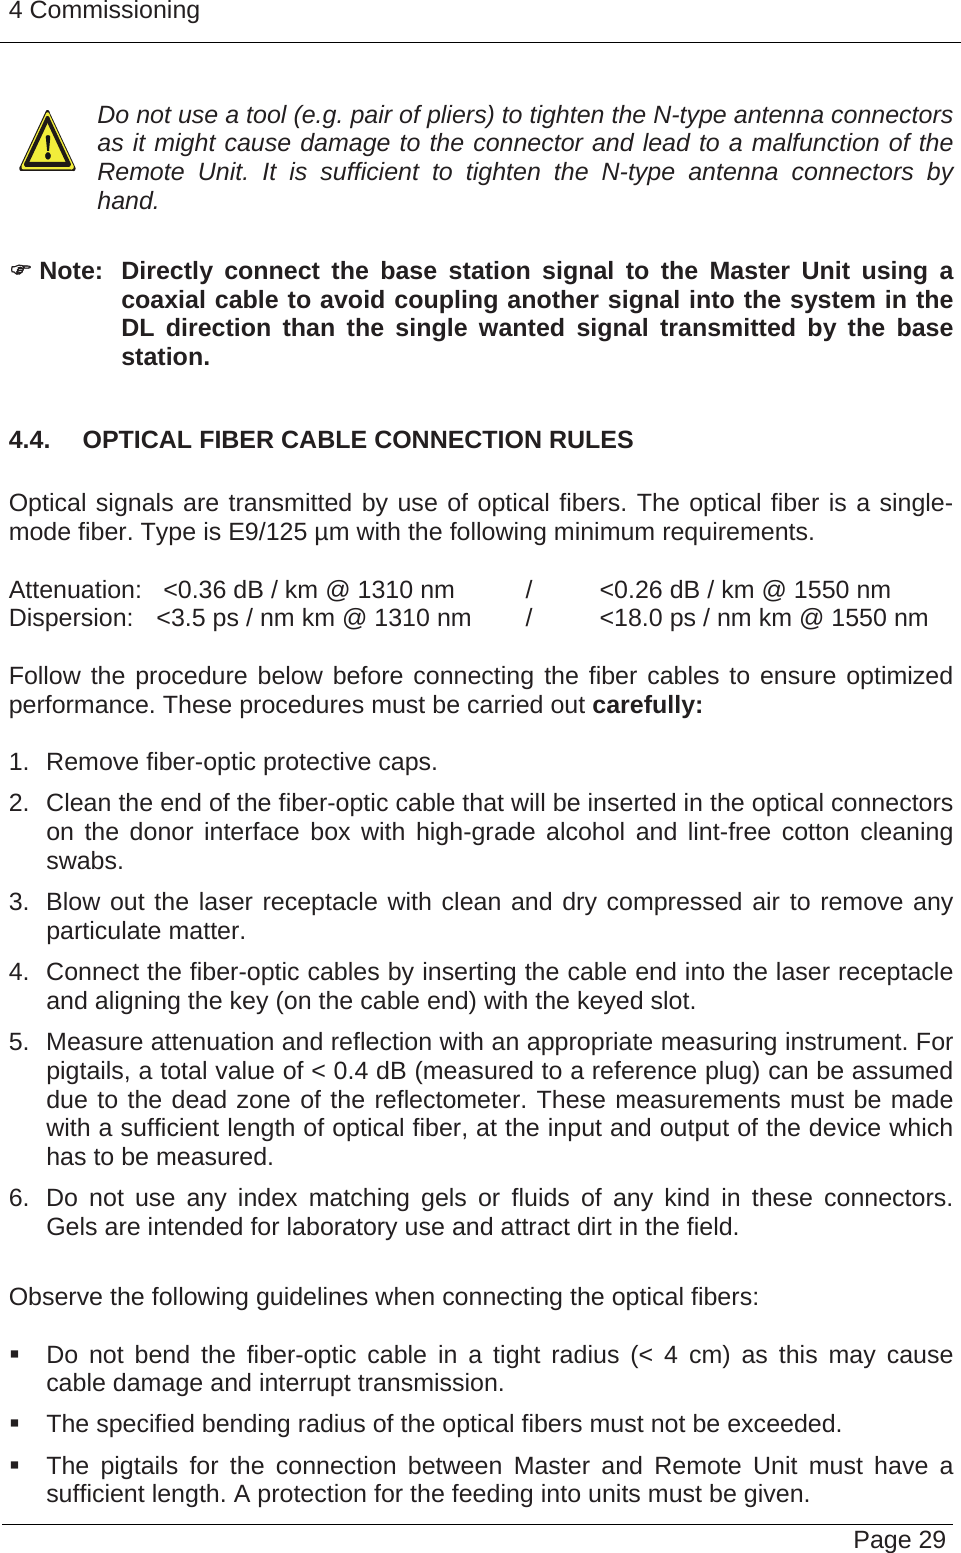 4 Commissioning   Page 29  Do not use a tool (e.g. pair of pliers) to tighten the N-type antenna connectors as it might cause damage to the connector and lead to a malfunction of the Remote Unit. It is sufficient to tighten the N-type antenna connectors by hand.  ) Note:  Directly connect the base station signal to the Master Unit using a coaxial cable to avoid coupling another signal into the system in the DL direction than the single wanted signal transmitted by the base station.  4.4.  OPTICAL FIBER CABLE CONNECTION RULES  Optical signals are transmitted by use of optical fibers. The optical fiber is a single-mode fiber. Type is E9/125 µm with the following minimum requirements.  Attenuation:   &lt;0.36 dB / km @ 1310 nm  /  &lt;0.26 dB / km @ 1550 nm Dispersion:  &lt;3.5 ps / nm km @ 1310 nm  /  &lt;18.0 ps / nm km @ 1550 nm  Follow the procedure below before connecting the fiber cables to ensure optimized performance. These procedures must be carried out carefully:  1.  Remove fiber-optic protective caps. 2.  Clean the end of the fiber-optic cable that will be inserted in the optical connectors on the donor interface box with high-grade alcohol and lint-free cotton cleaning swabs. 3.  Blow out the laser receptacle with clean and dry compressed air to remove any particulate matter. 4.  Connect the fiber-optic cables by inserting the cable end into the laser receptacle and aligning the key (on the cable end) with the keyed slot. 5.  Measure attenuation and reflection with an appropriate measuring instrument. For pigtails, a total value of &lt; 0.4 dB (measured to a reference plug) can be assumed due to the dead zone of the reflectometer. These measurements must be made with a sufficient length of optical fiber, at the input and output of the device which has to be measured. 6.  Do not use any index matching gels or fluids of any kind in these connectors. Gels are intended for laboratory use and attract dirt in the field.  Observe the following guidelines when connecting the optical fibers:     Do not bend the fiber-optic cable in a tight radius (&lt; 4 cm) as this may cause cable damage and interrupt transmission.   The specified bending radius of the optical fibers must not be exceeded.    The pigtails for the connection between Master and Remote Unit must have a sufficient length. A protection for the feeding into units must be given.   